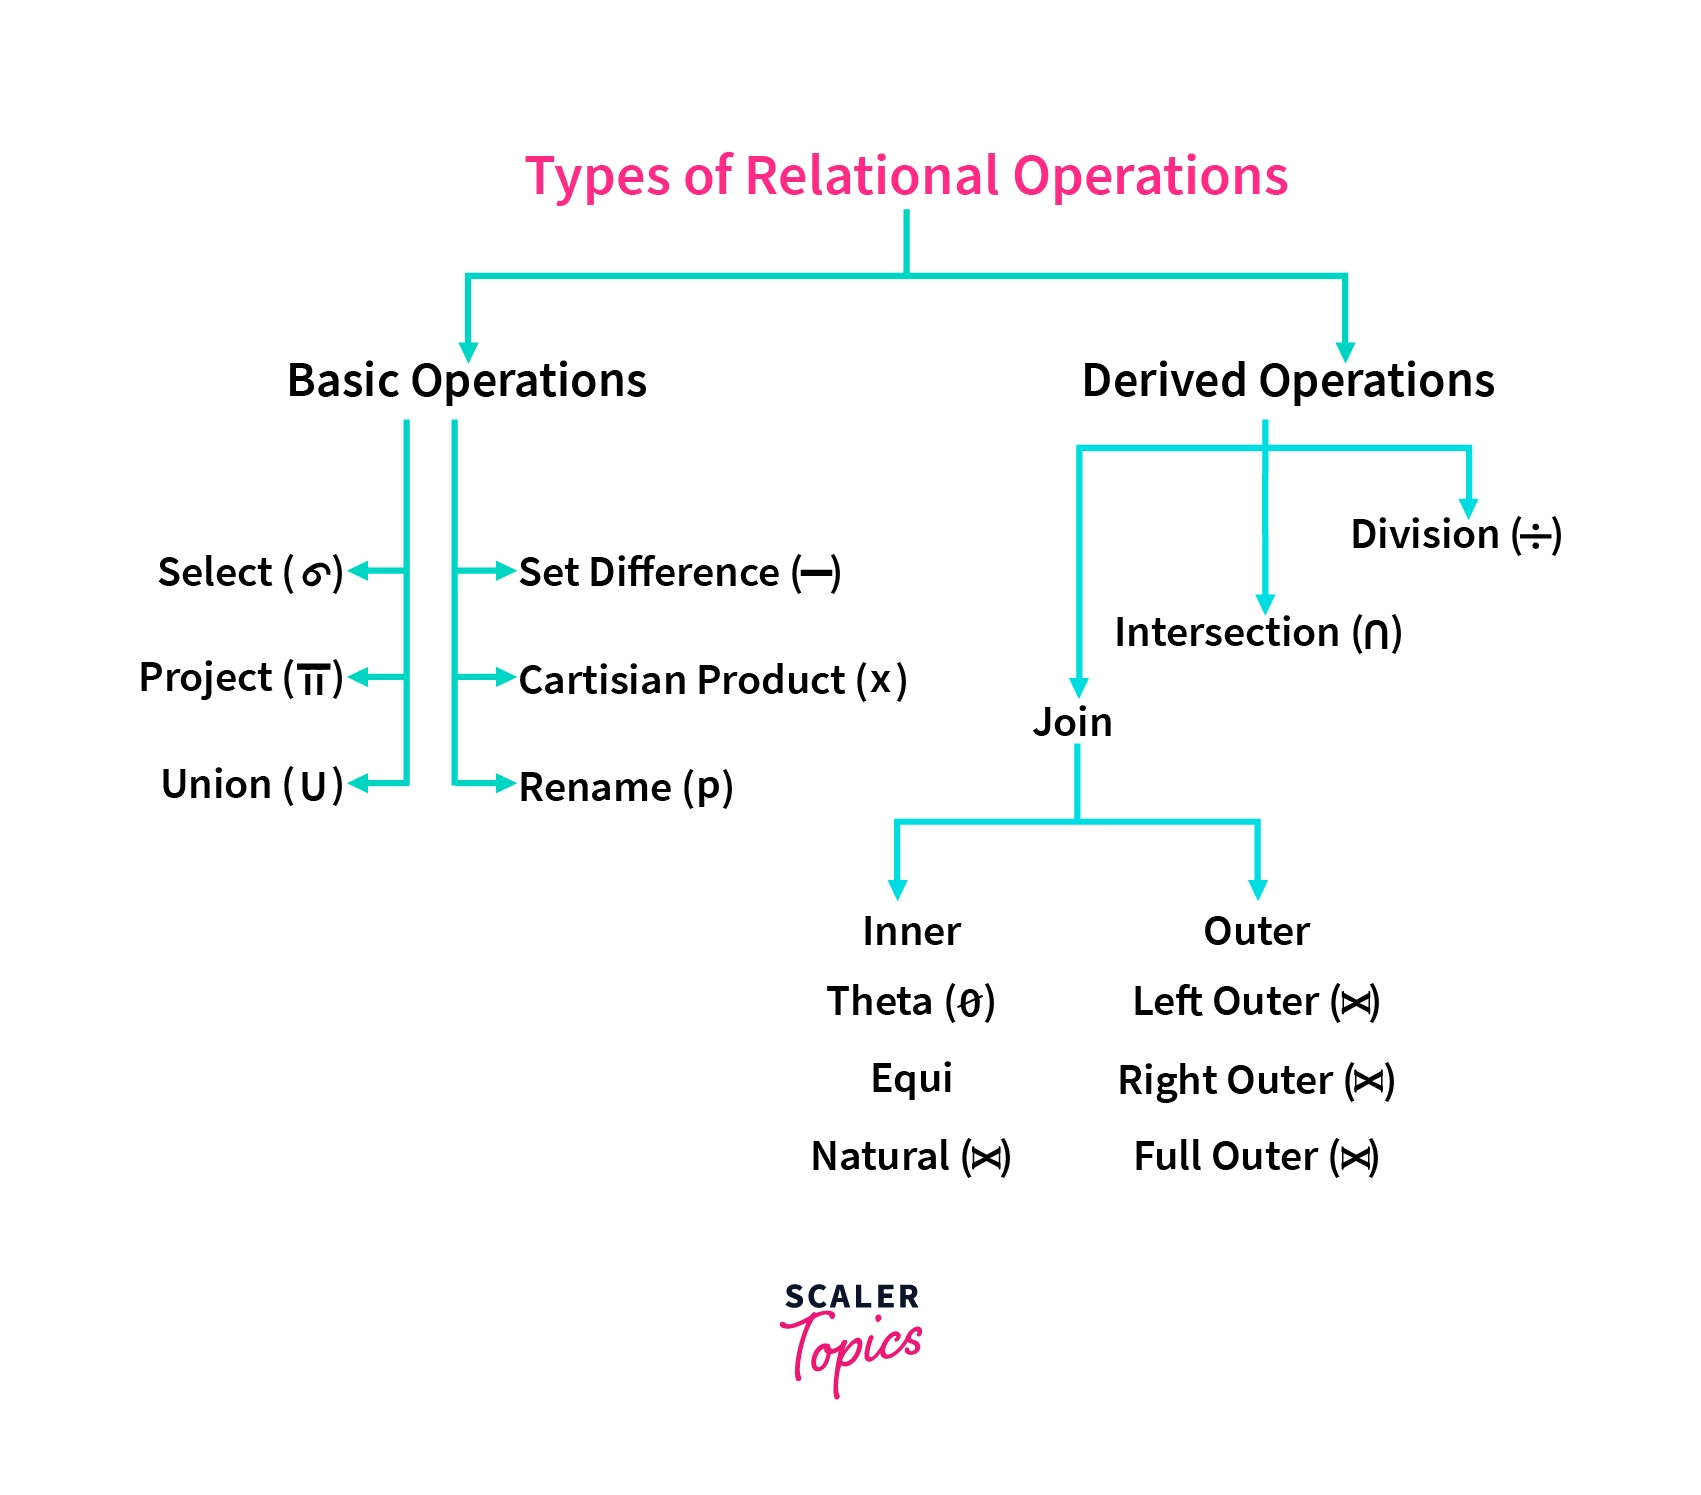 Types of Relational Operations